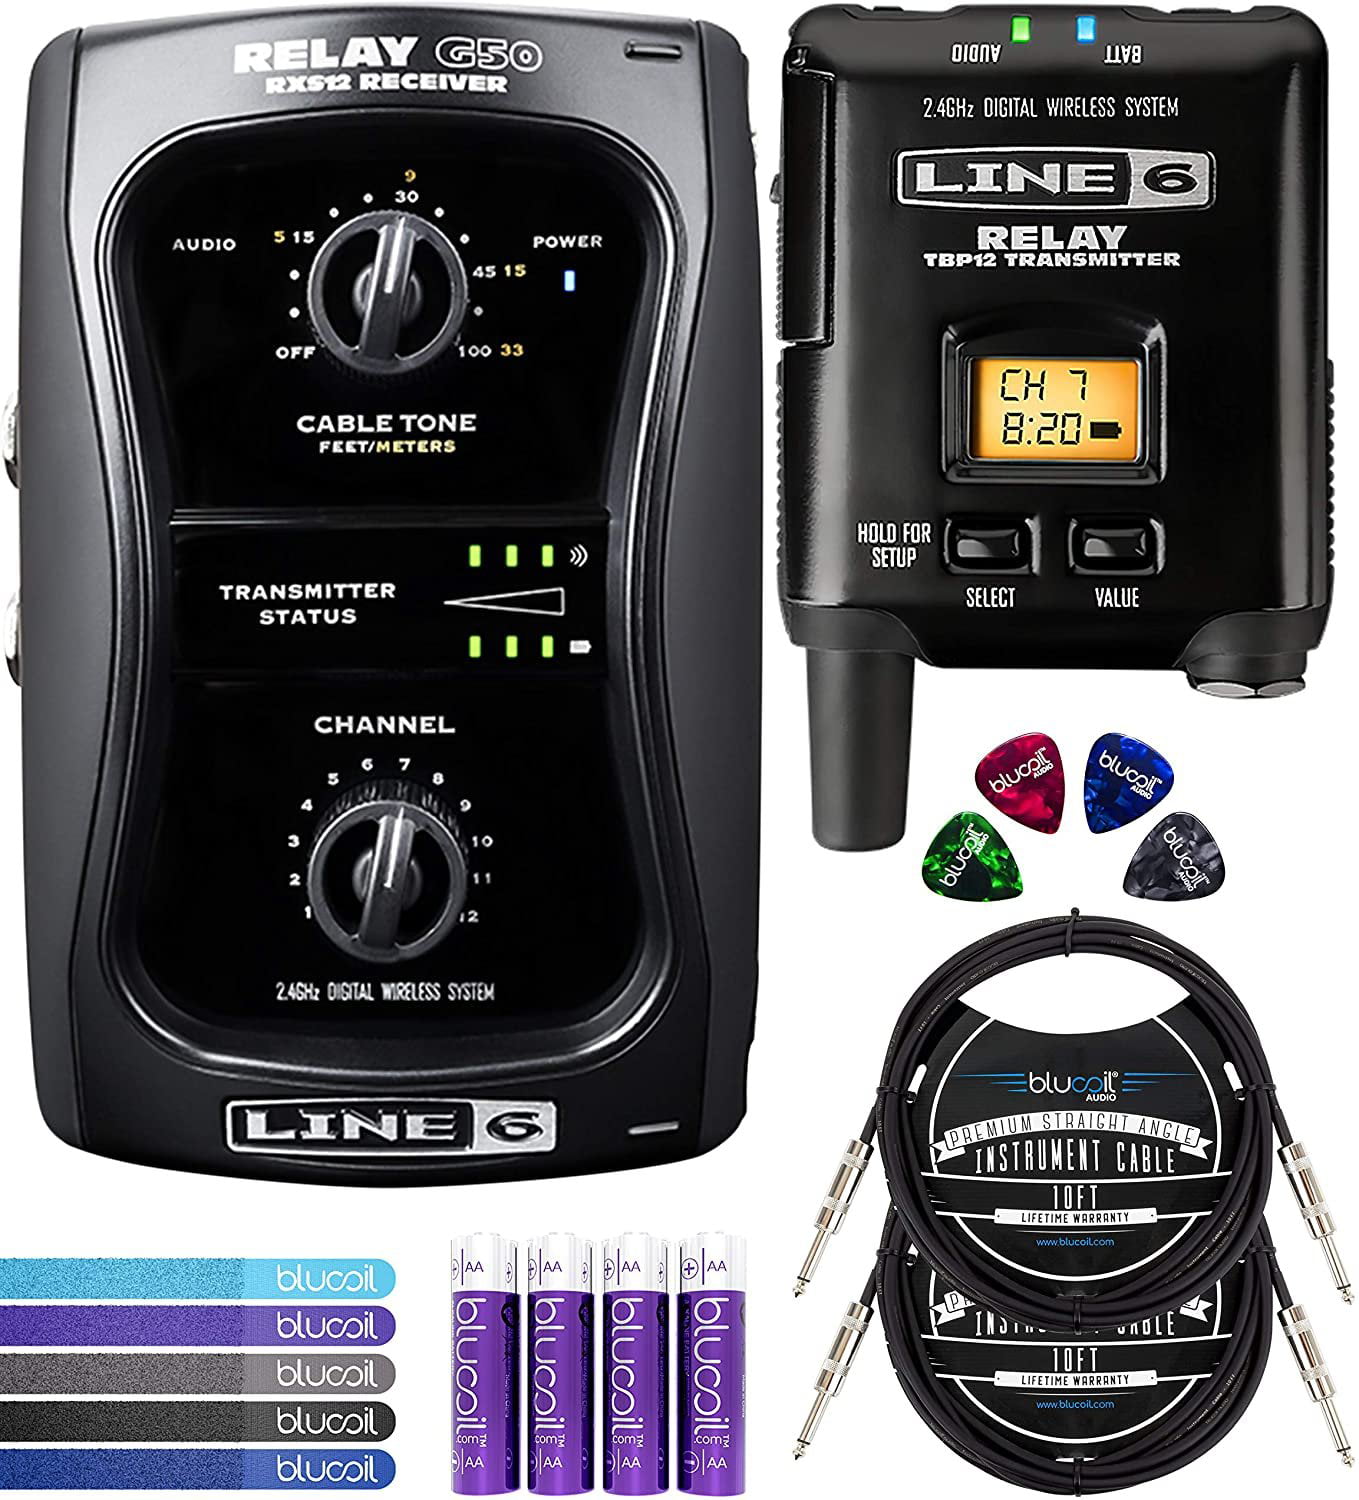 Line 6 Relay G50 Wireless Guitar System with Blucoil Instrument 